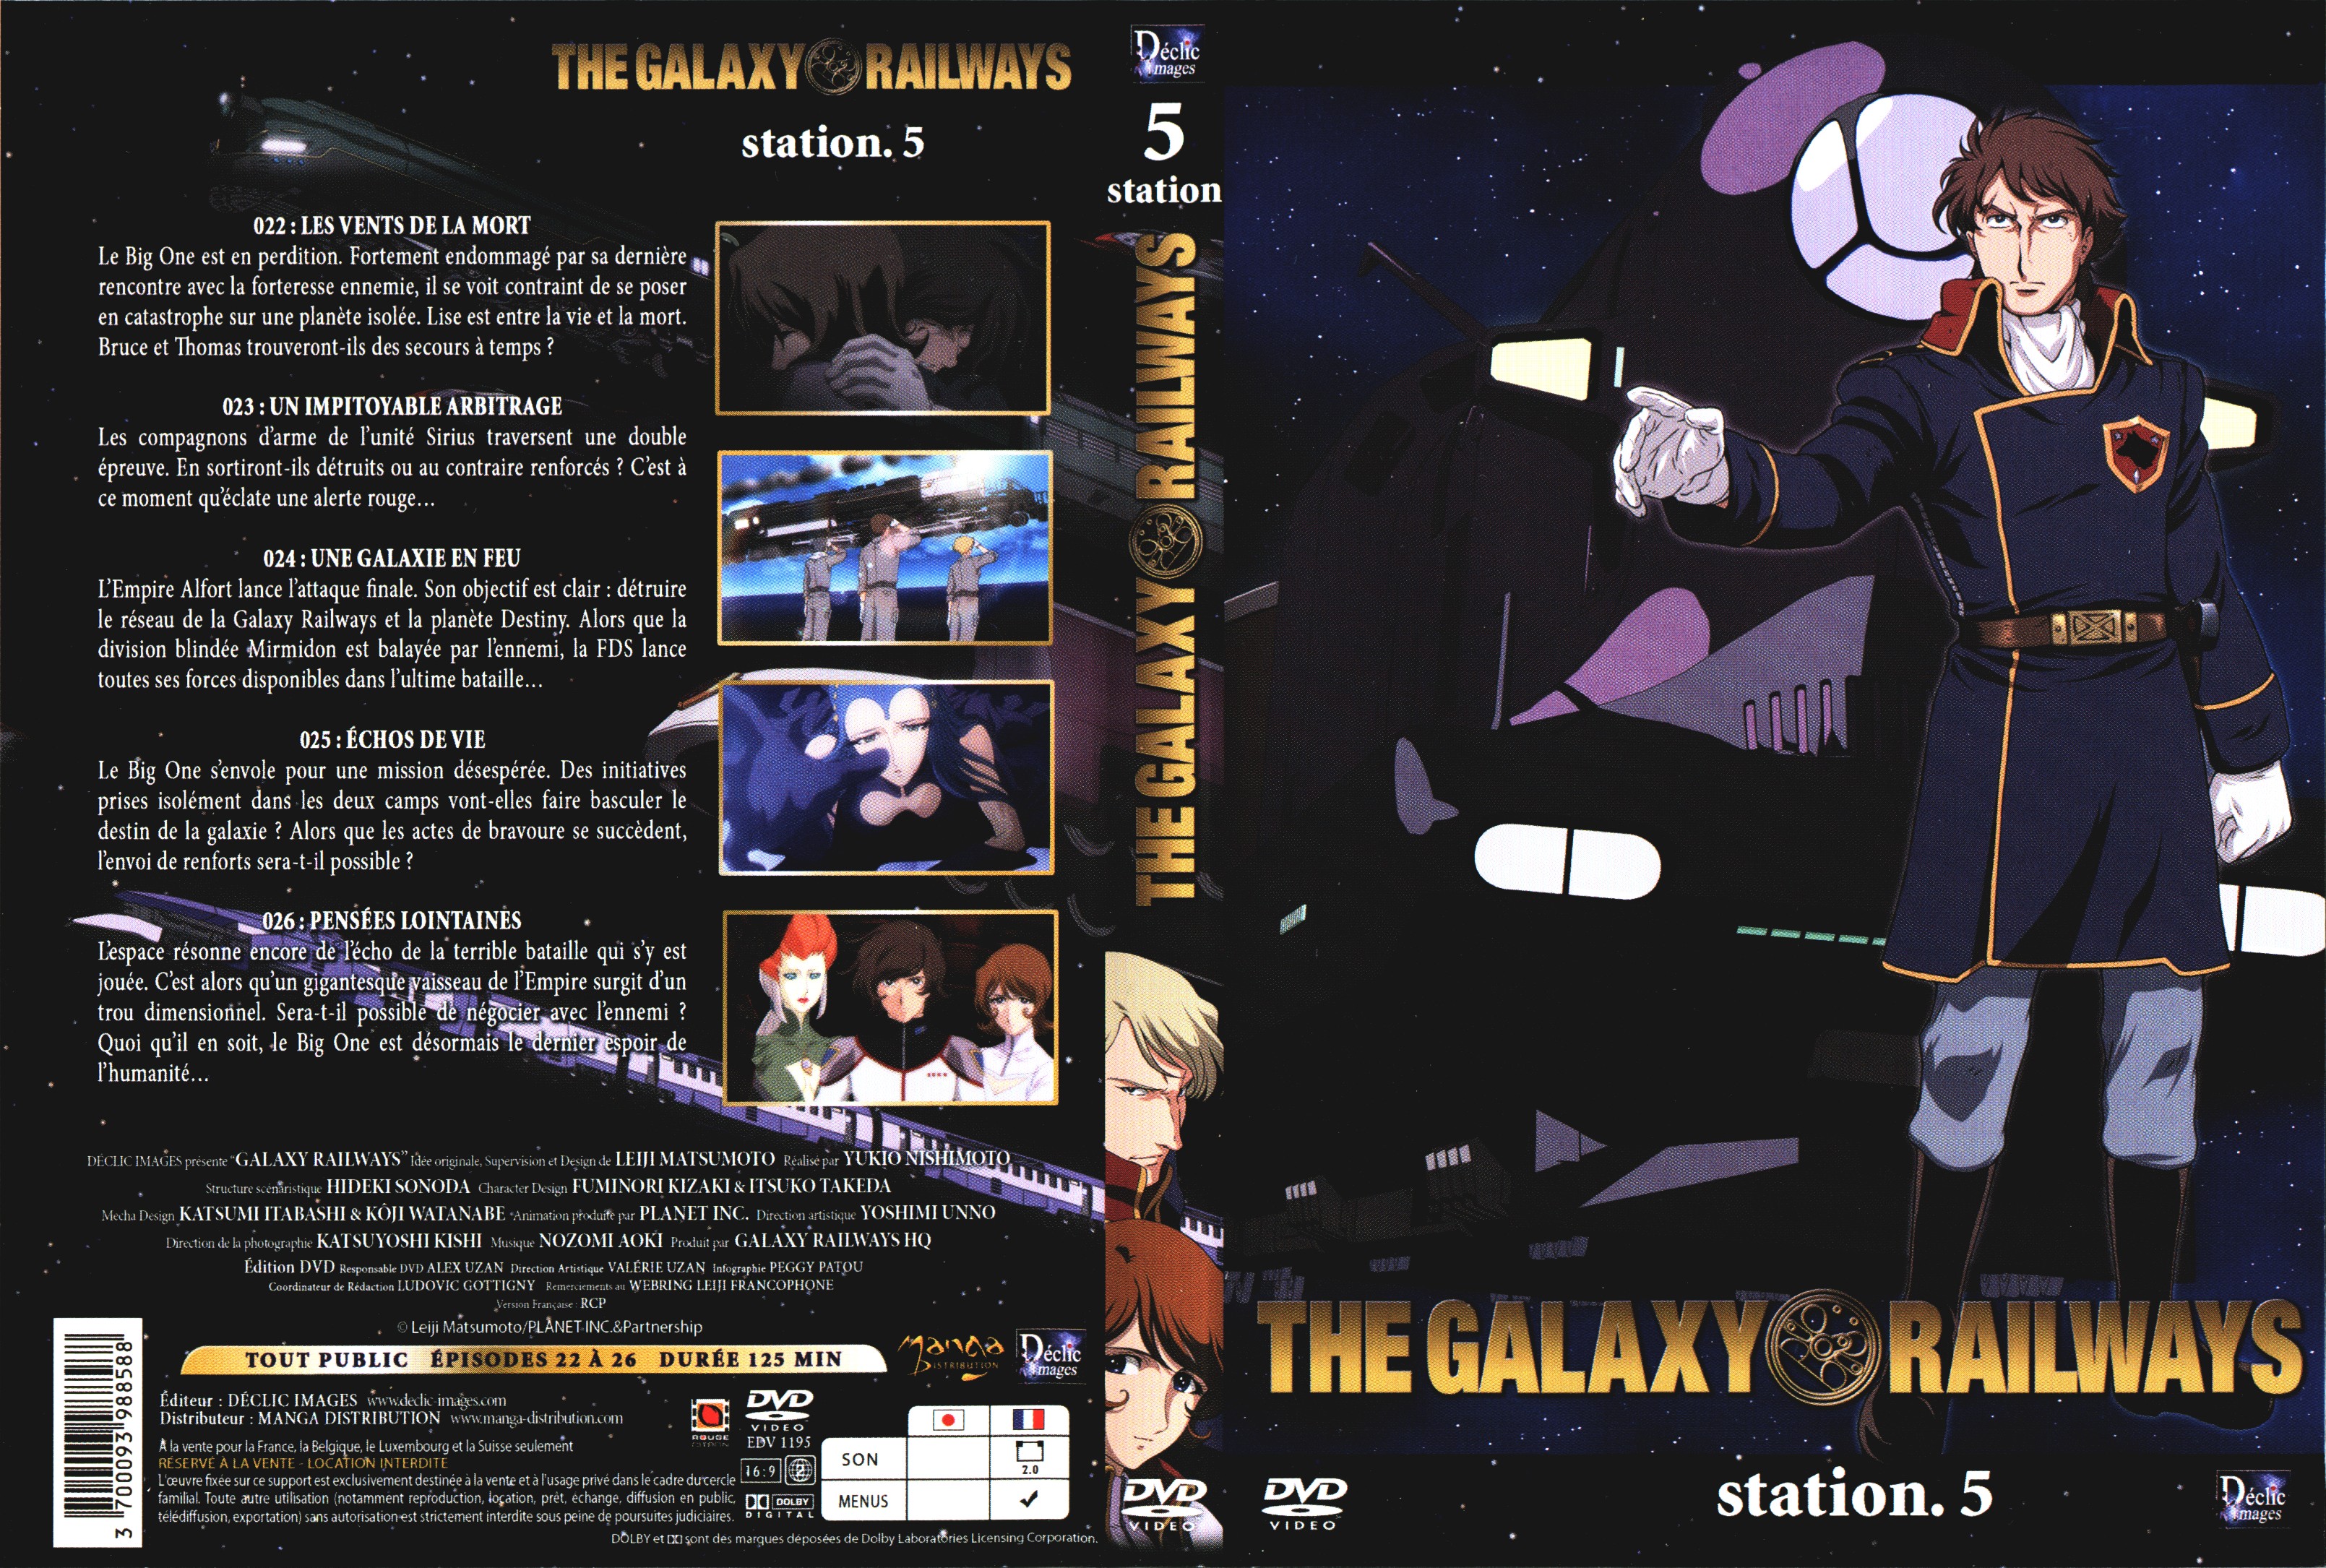 Jaquette DVD The galaxy railways station 5